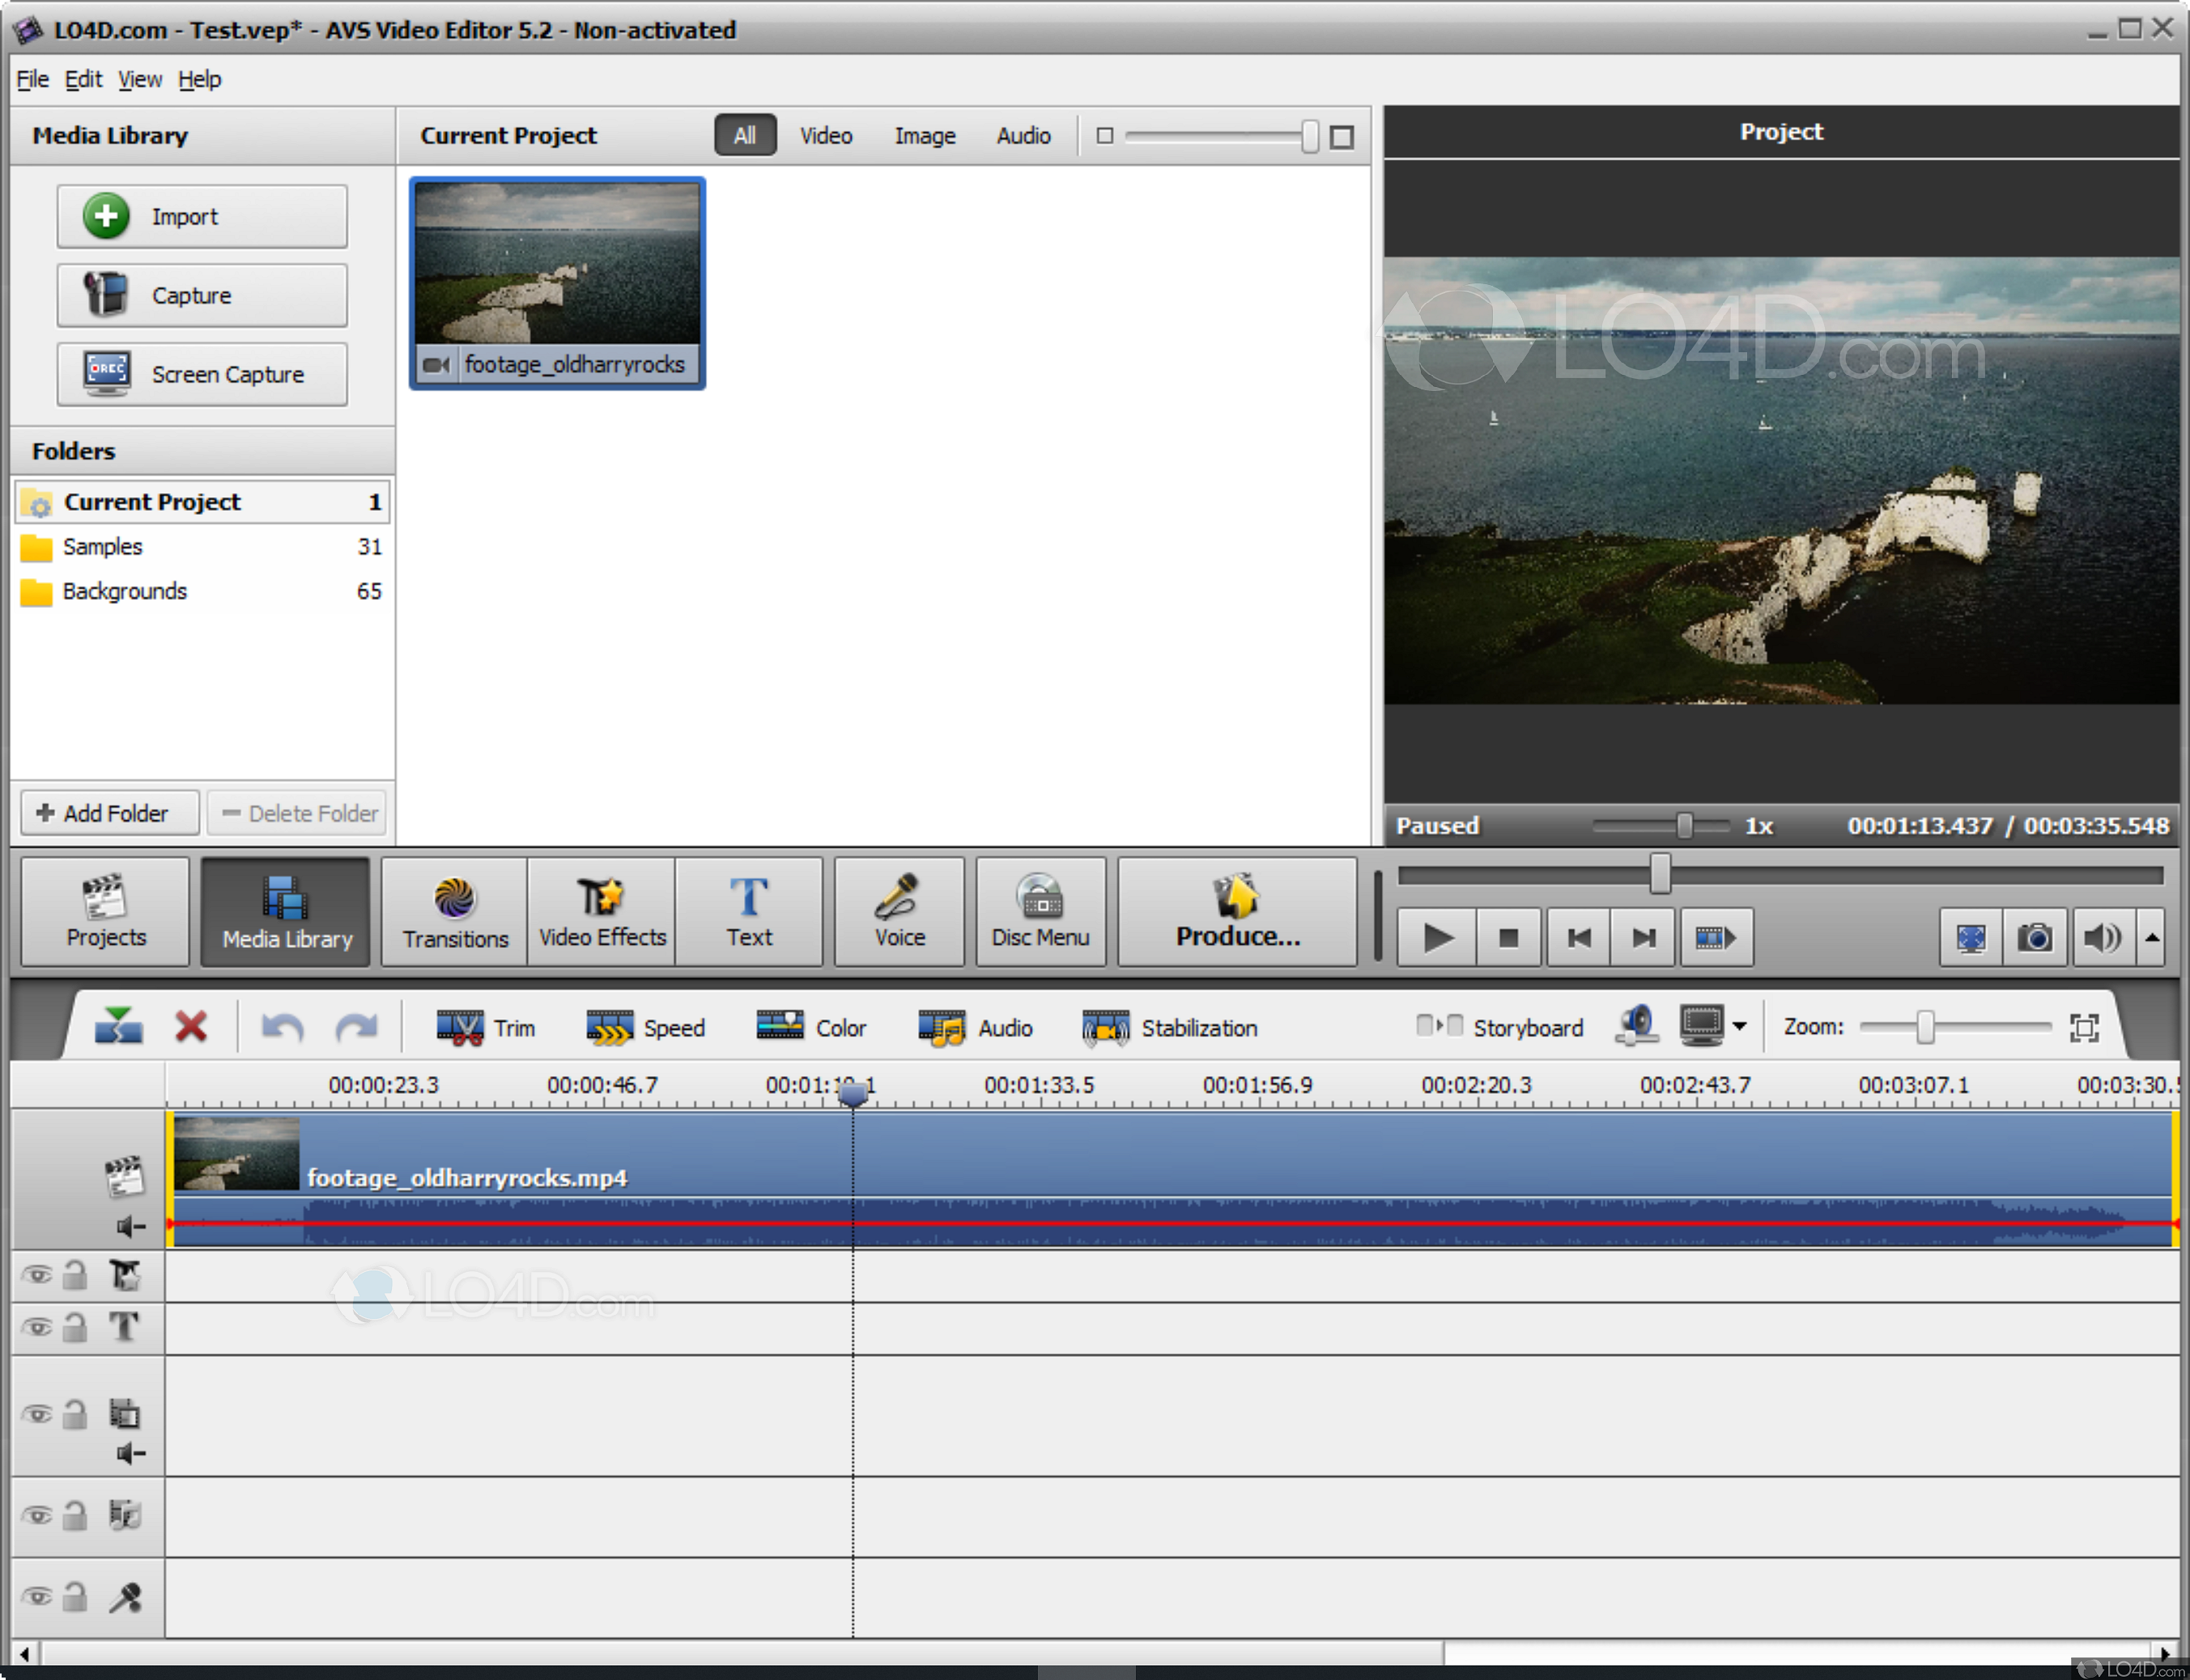 avs video editor activation code free